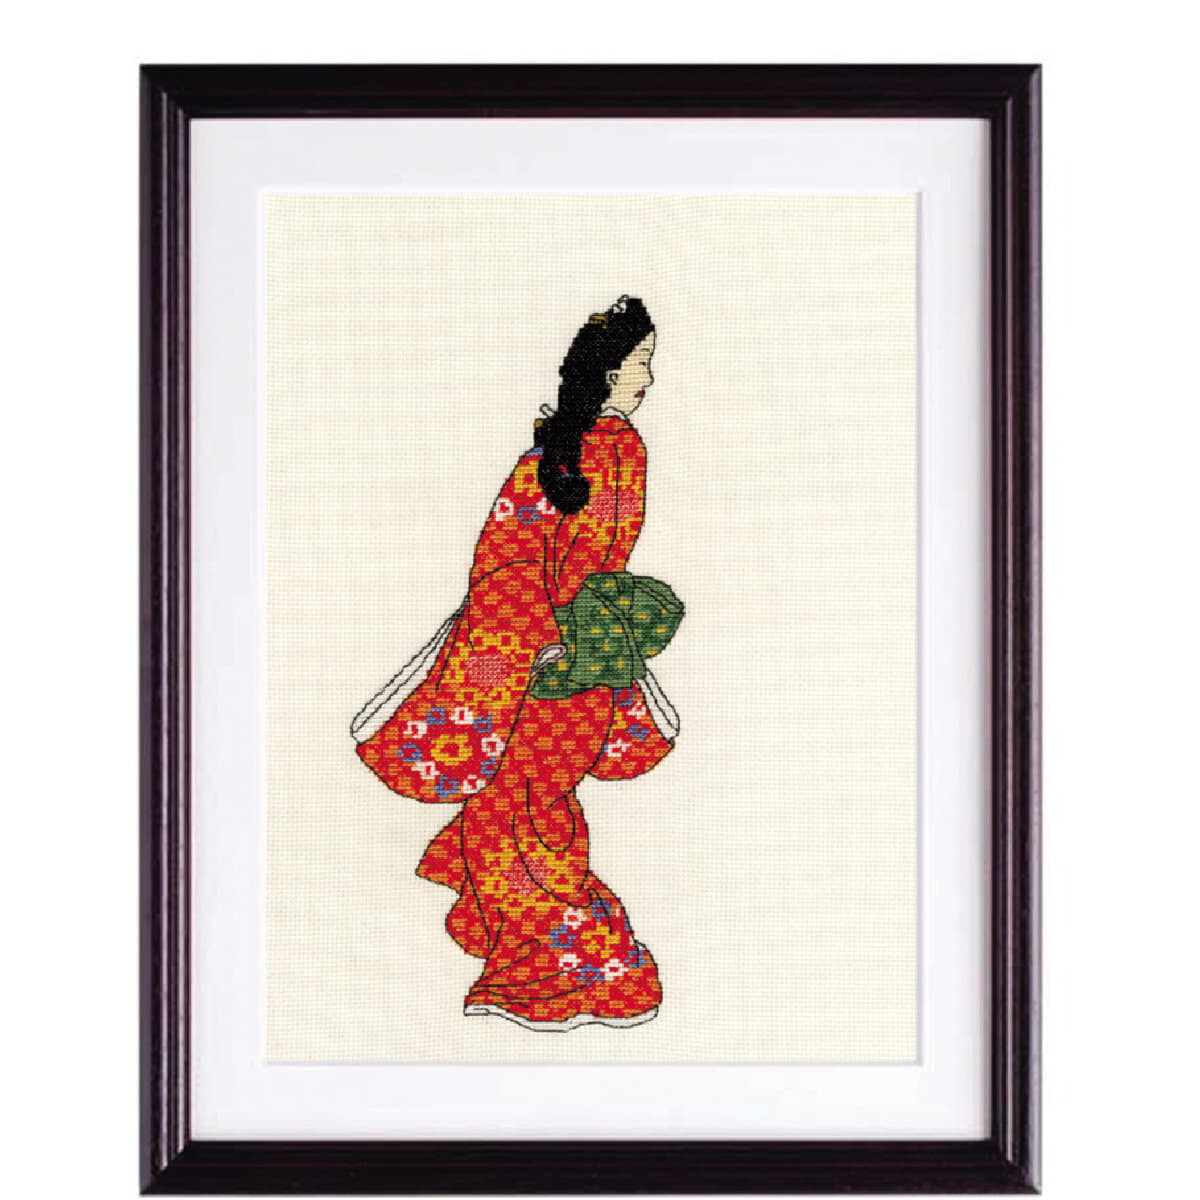 Olympus counted cross stitch kit "Beauty looking...